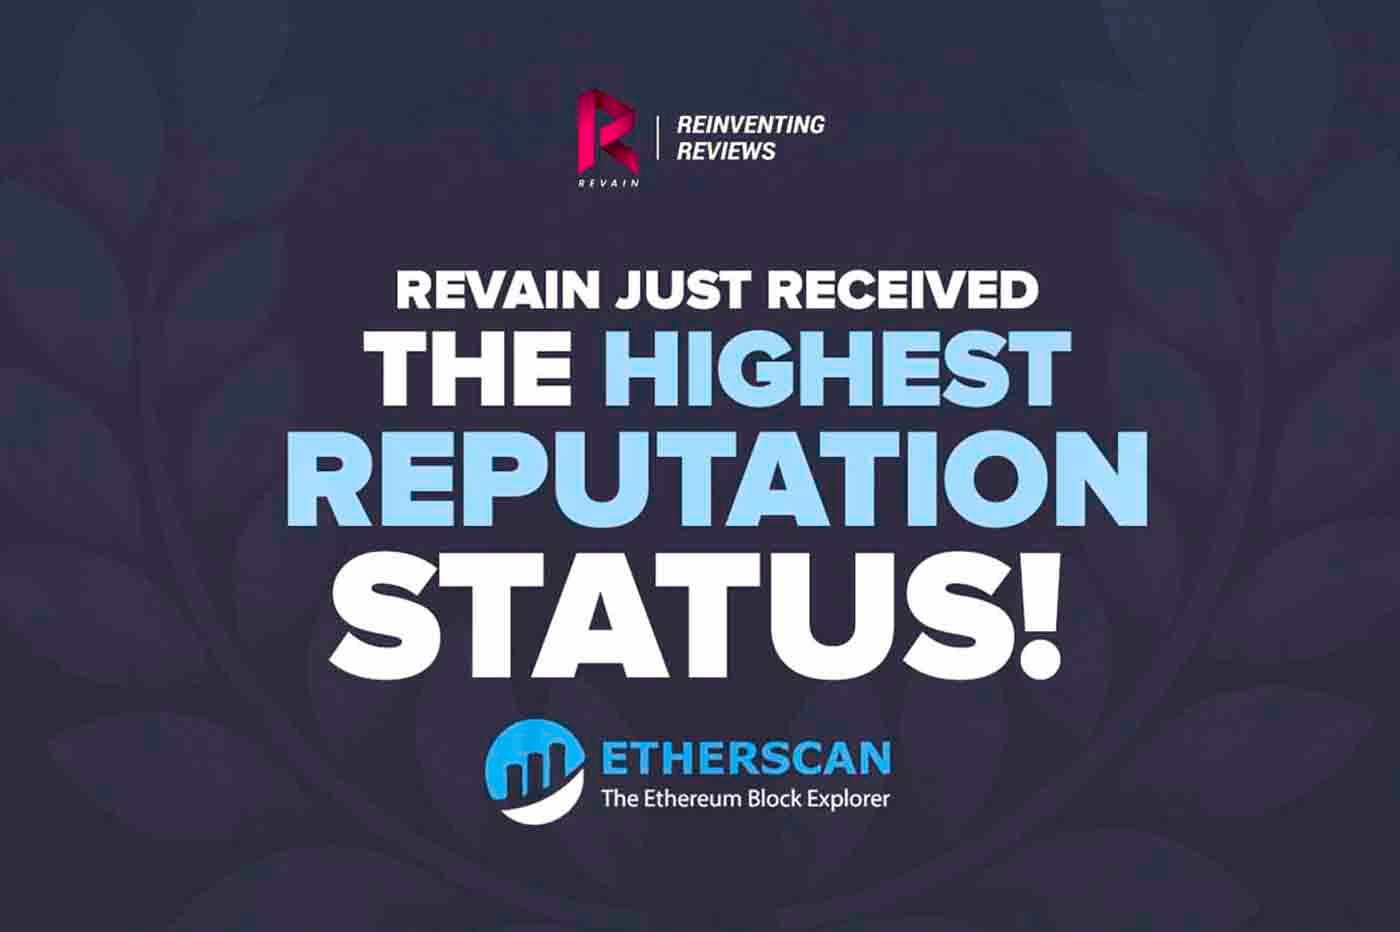 Revain status on Etherscan was just upgraded